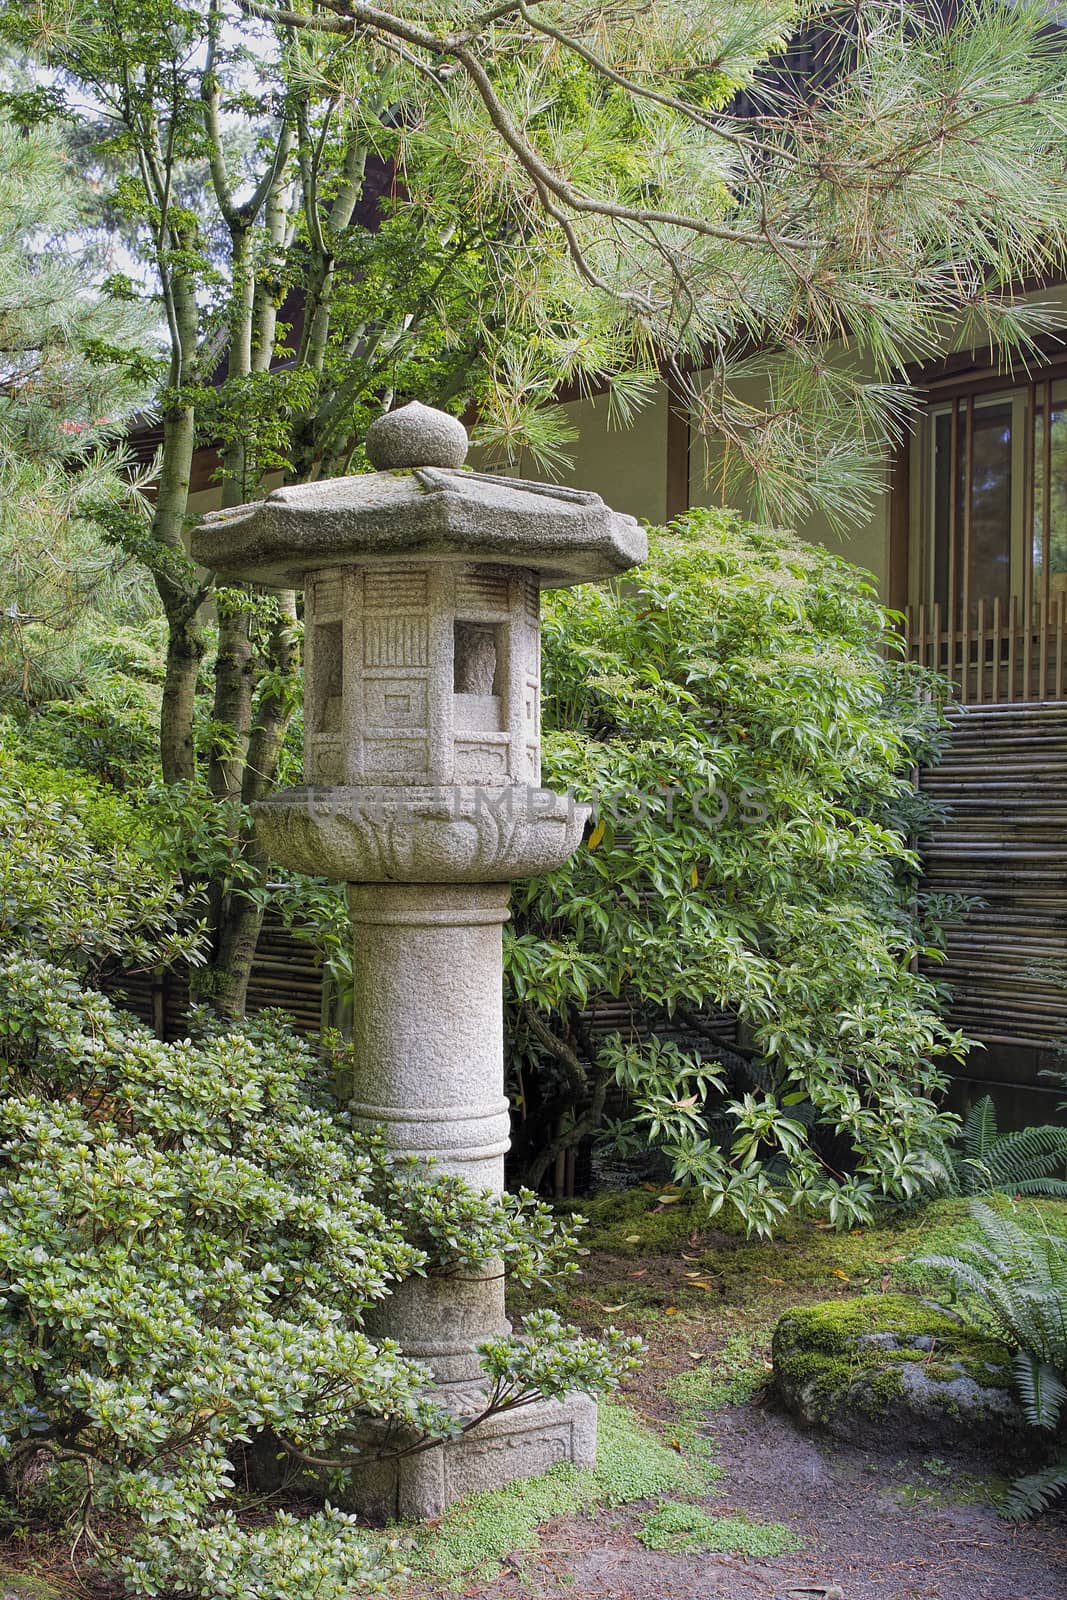 Japanese Stone Lantern in Garden with Trees Plants and Shrubs during Fall Season